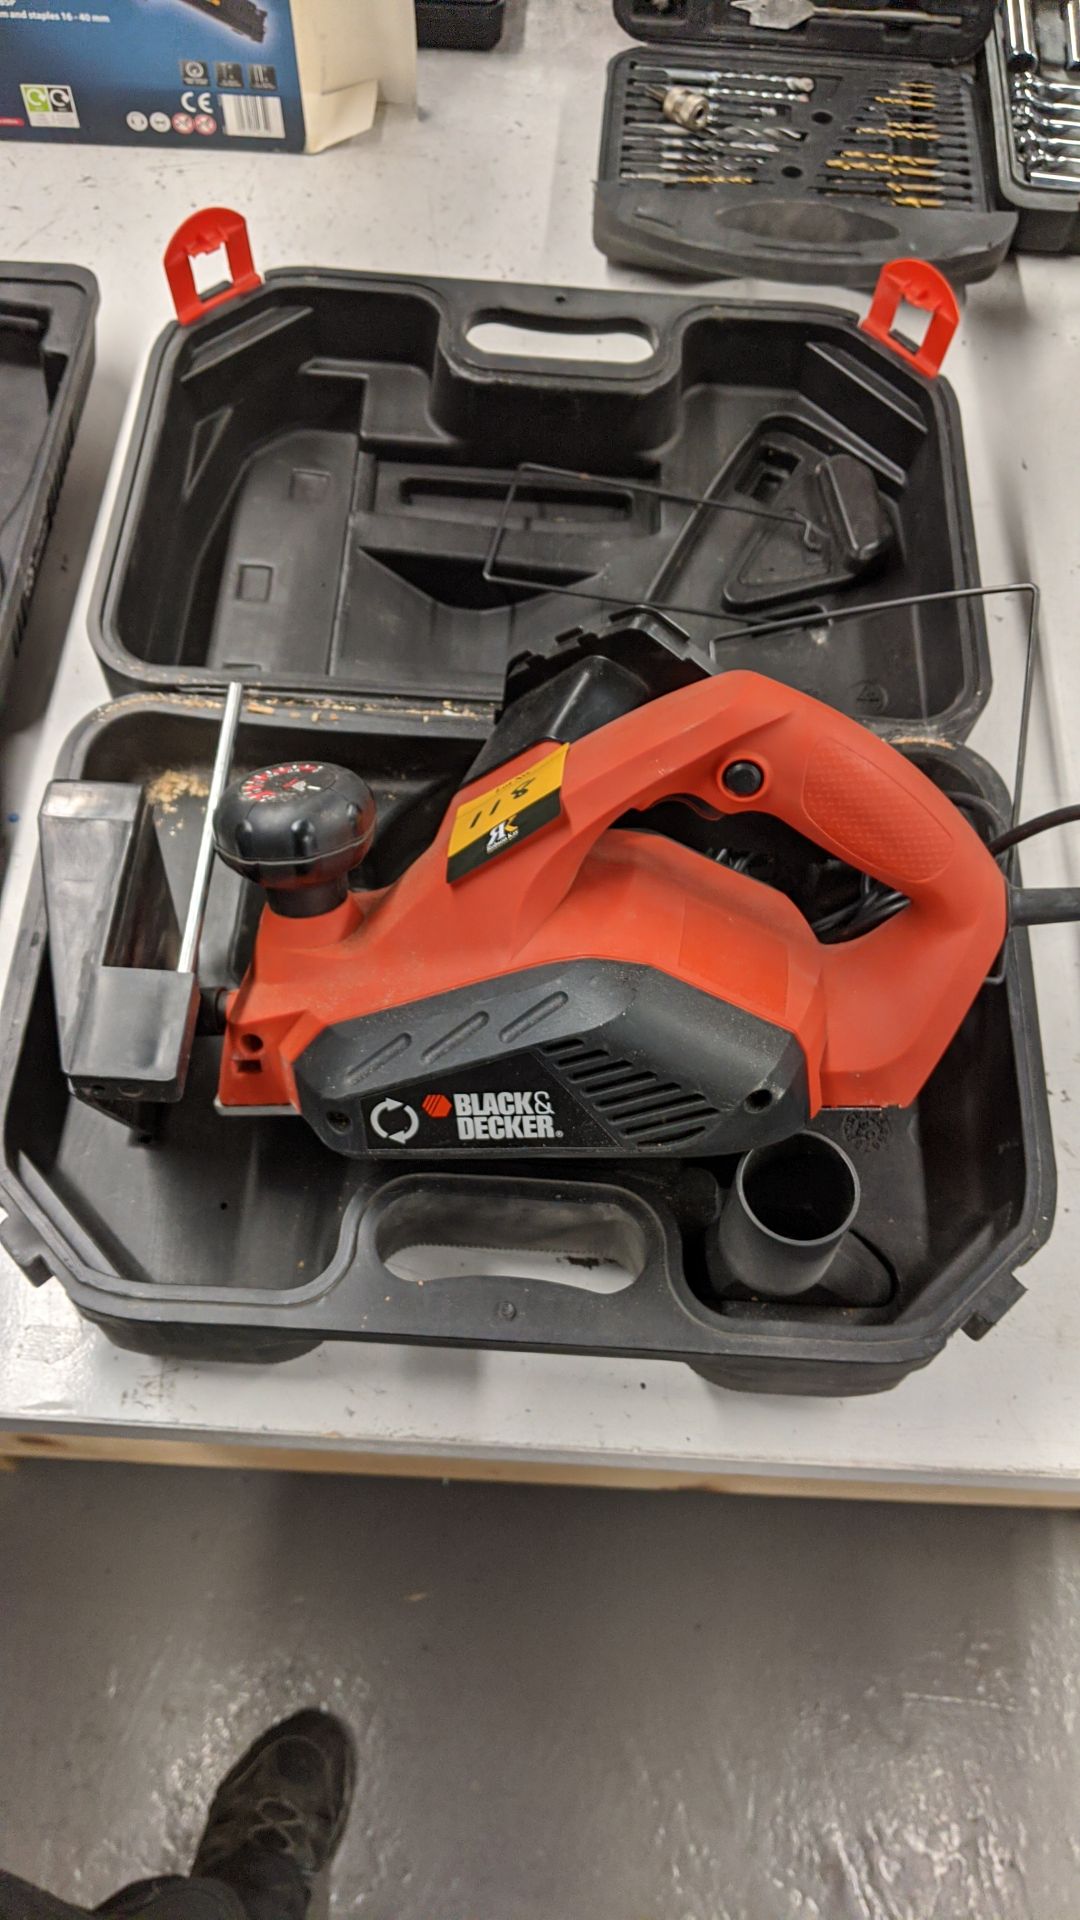 Black & Decker KW712 electric planer with case Please note, lots 1 - 200 are located at Samson